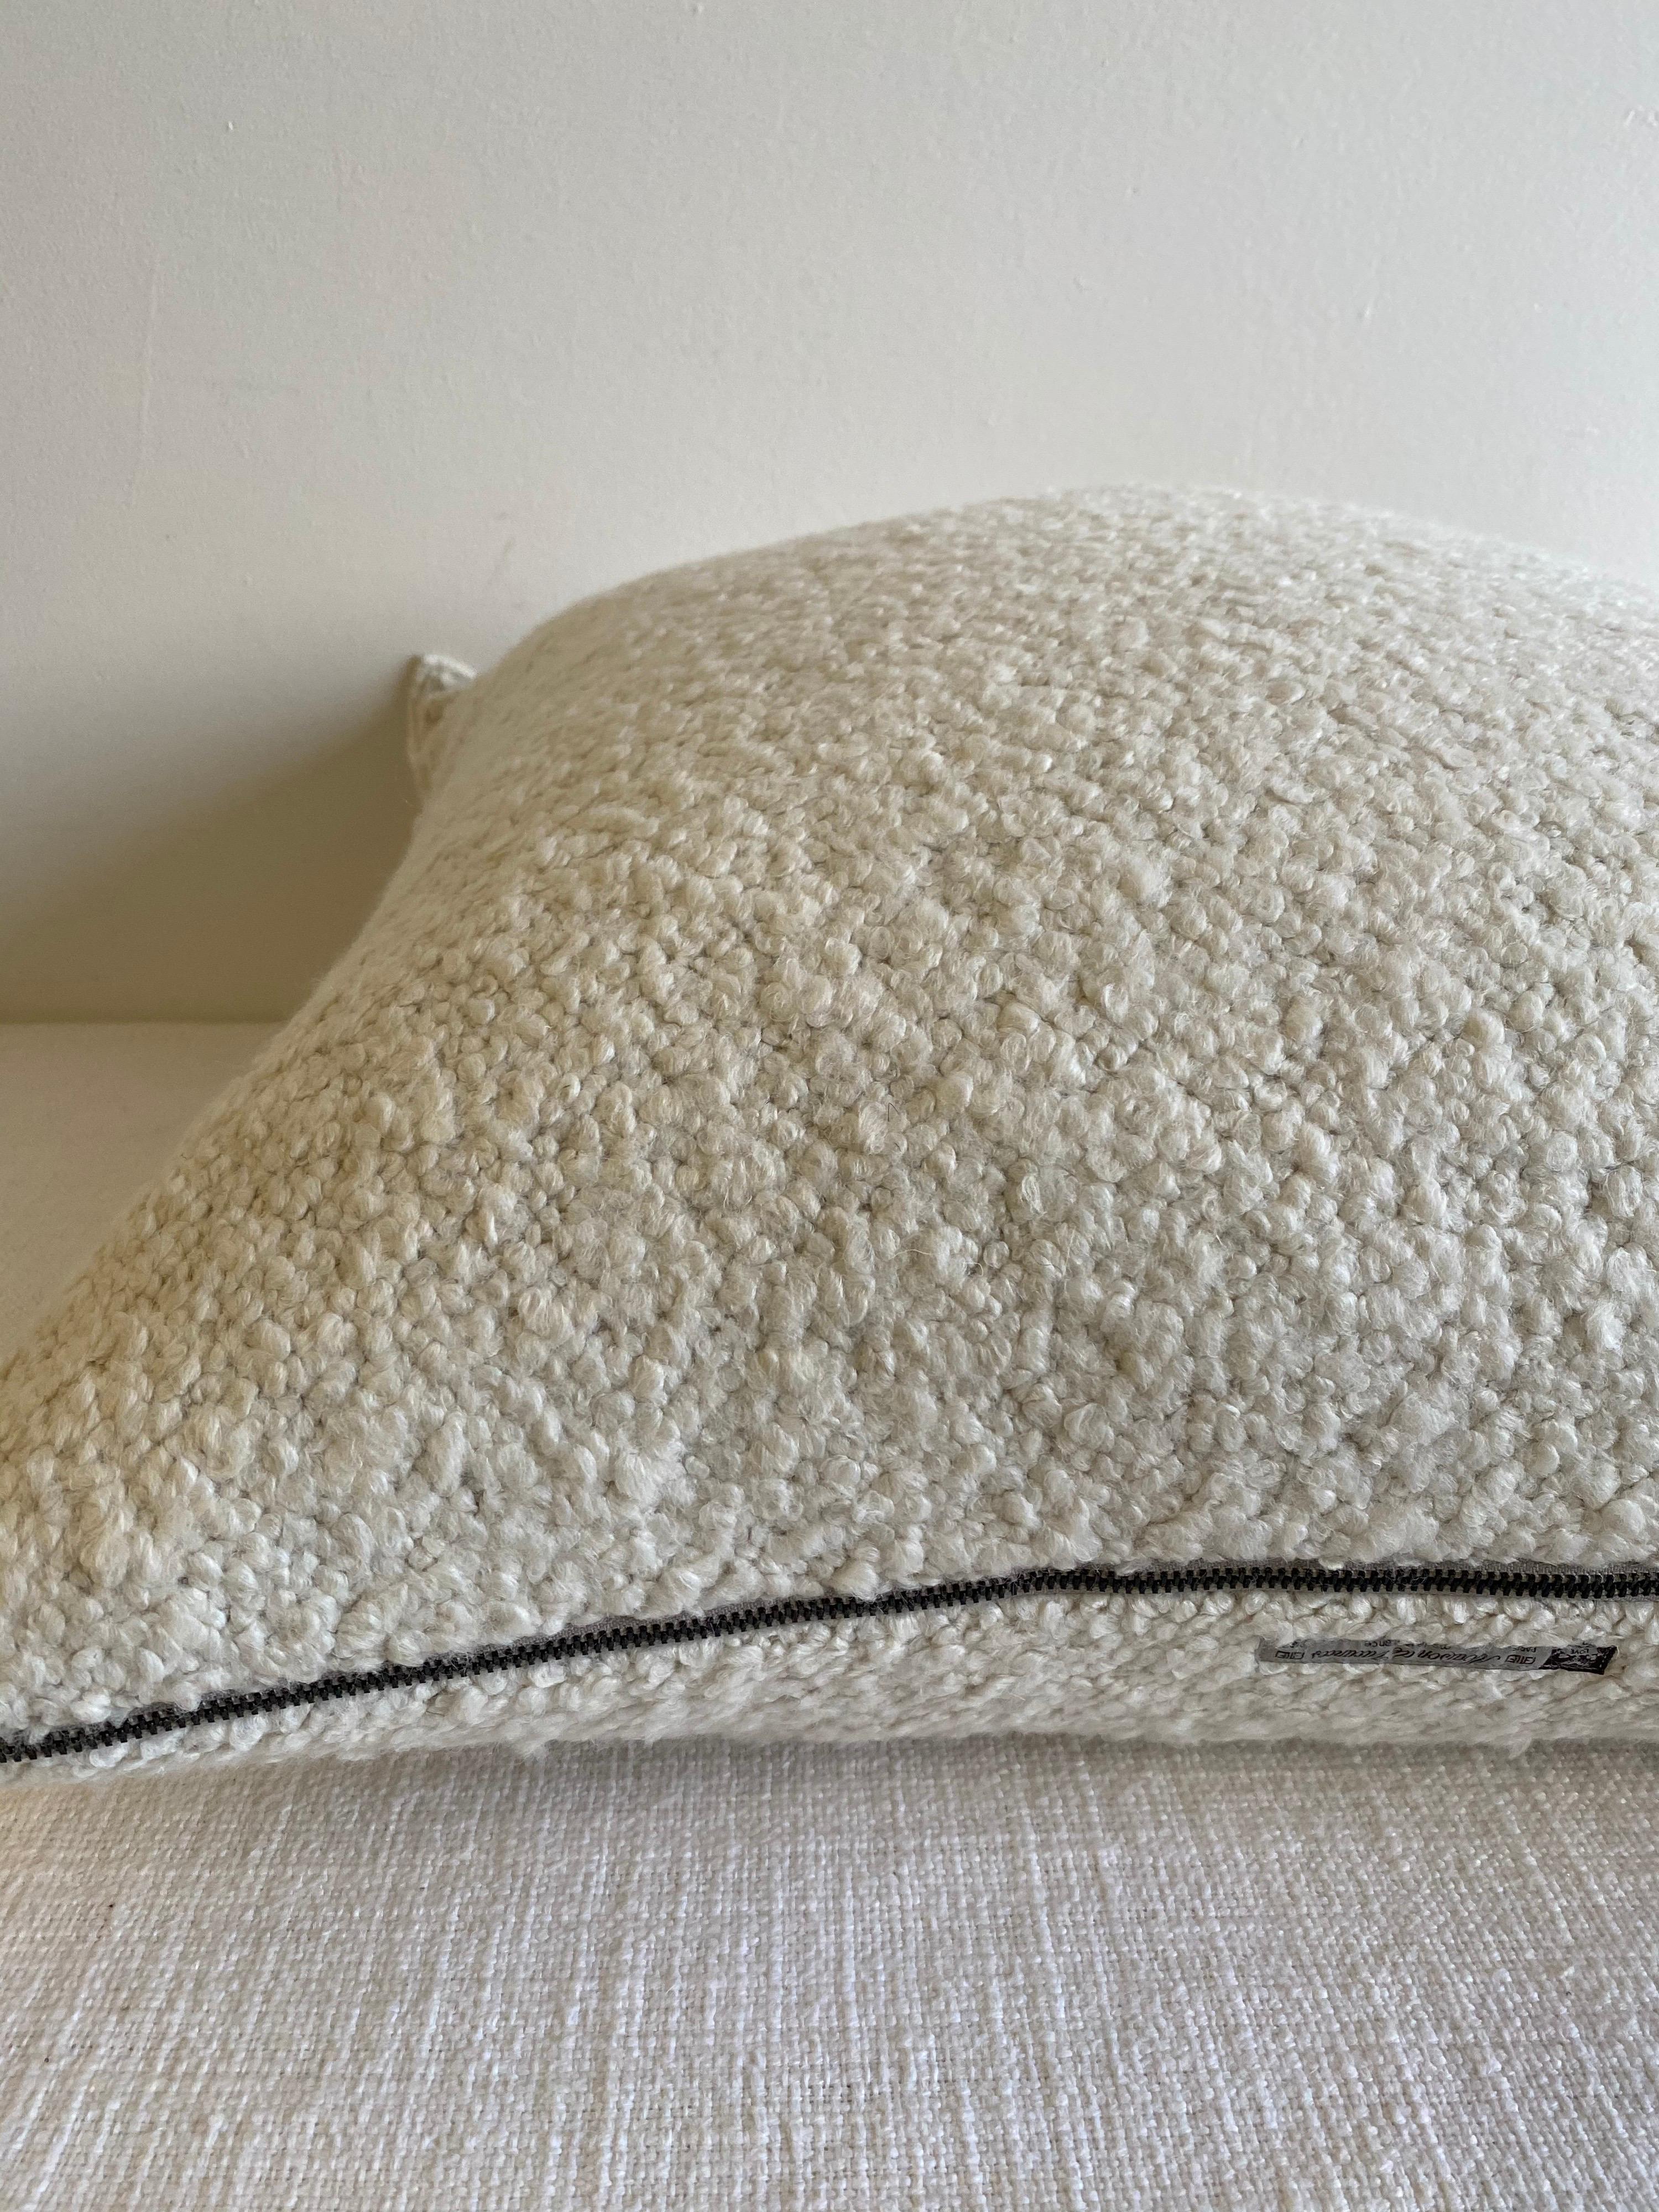 Custom Linen and Wool Blend Euro Pillow In New Condition For Sale In Brea, CA